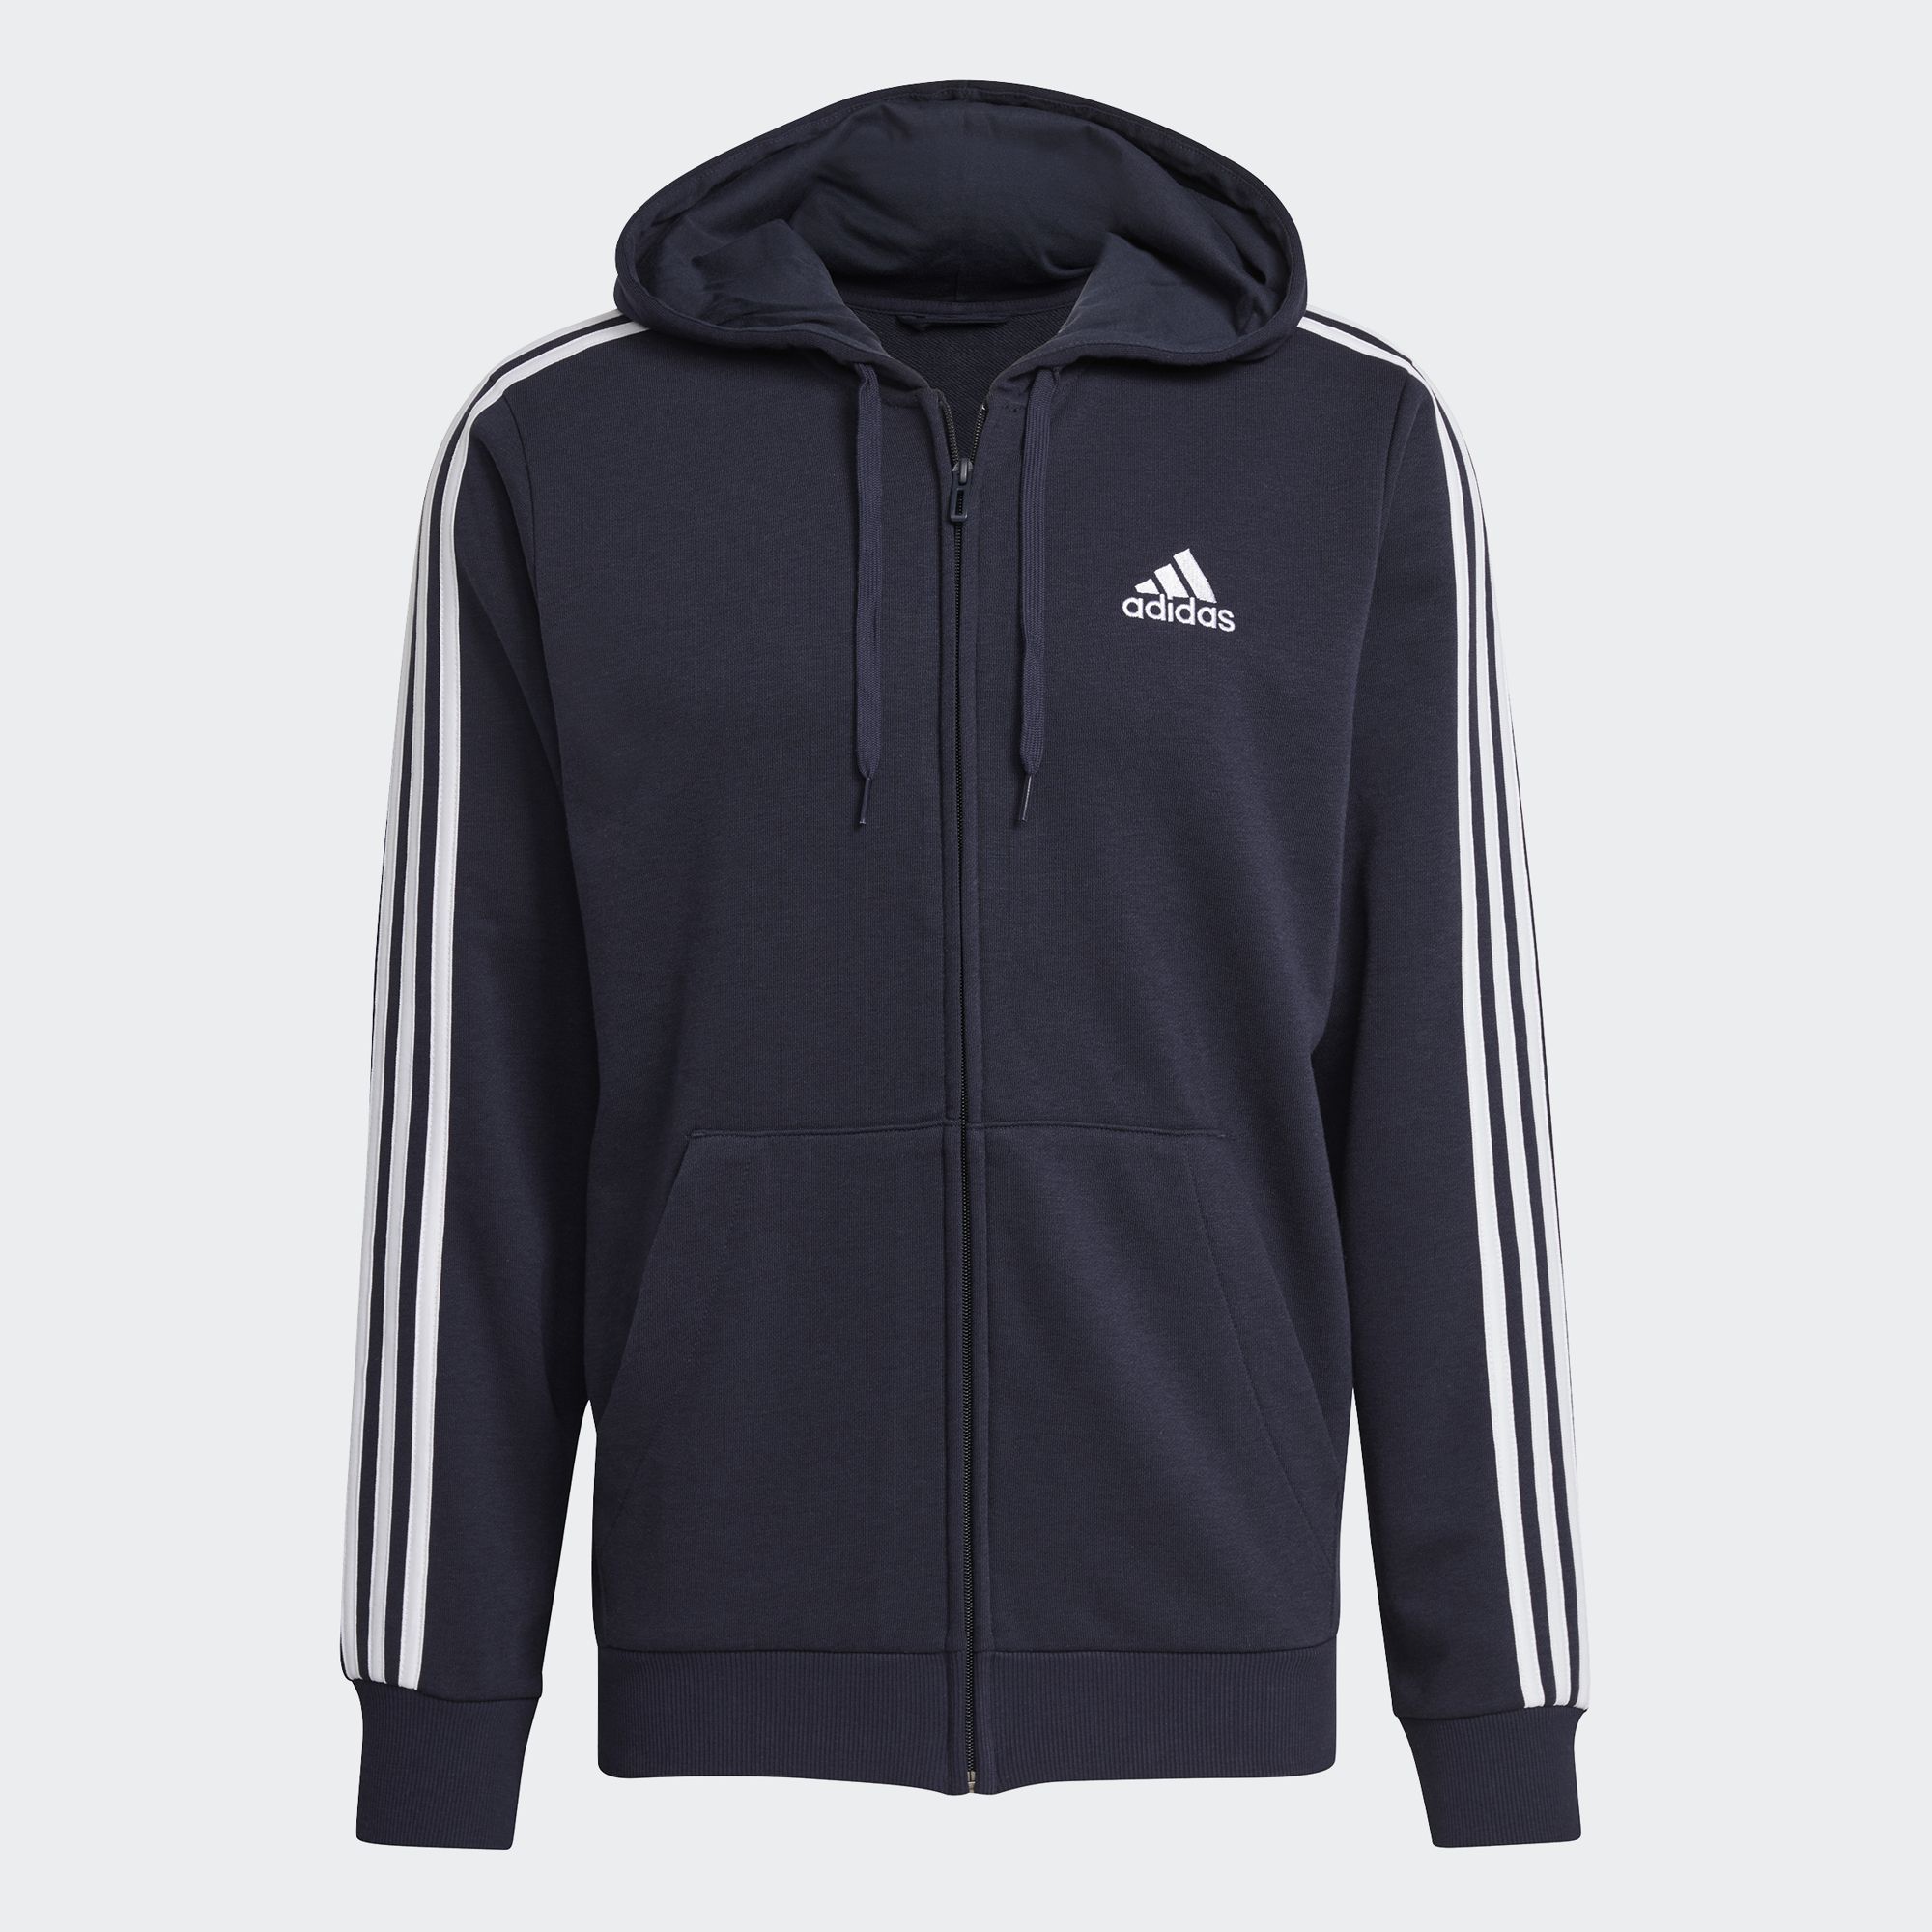 adidas NOT SPORTS SPECIFIC Essentials French Terry 3-Stripes Full-Zip Hoodie ผู้ชาย สีน้ำเงิน GK9033